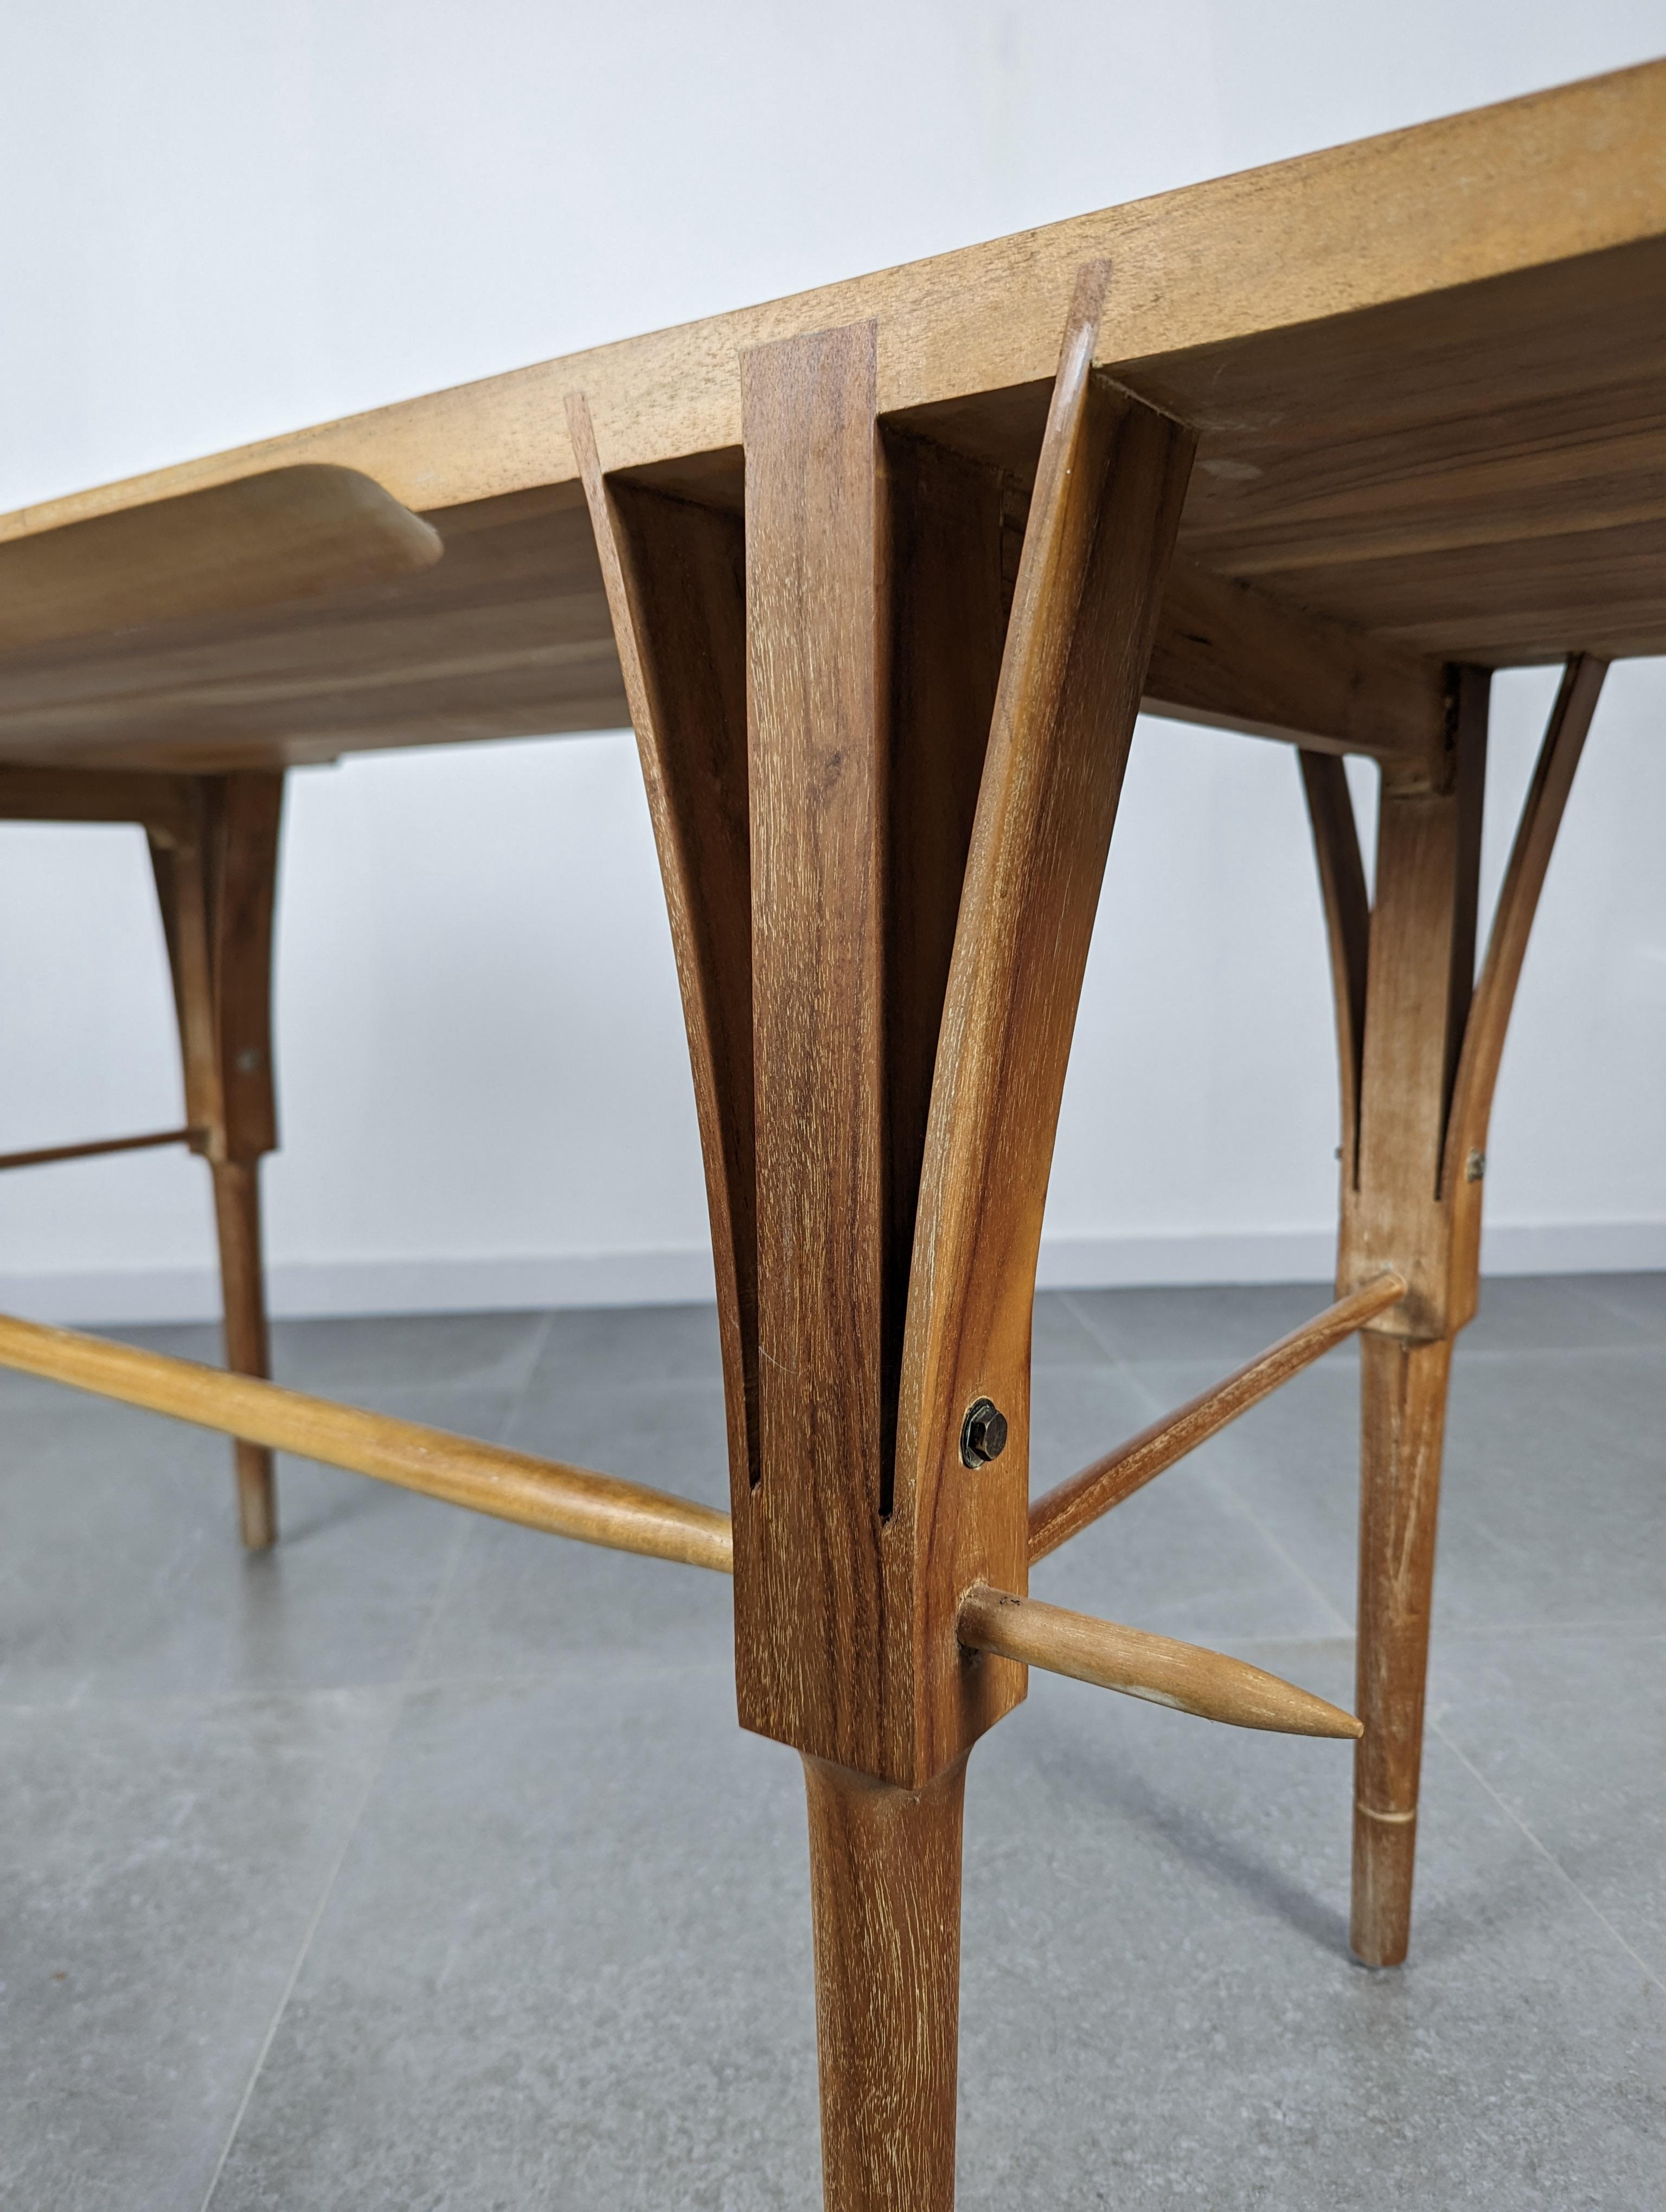 Exclusive wooden desk attributed to the important Danish designer and architect Sven Ellekaer. Ellekaer's unmistakable design with its V-shaped curved wood and the precise union between pieces show the excellent craftsmanship of Danish mid-century